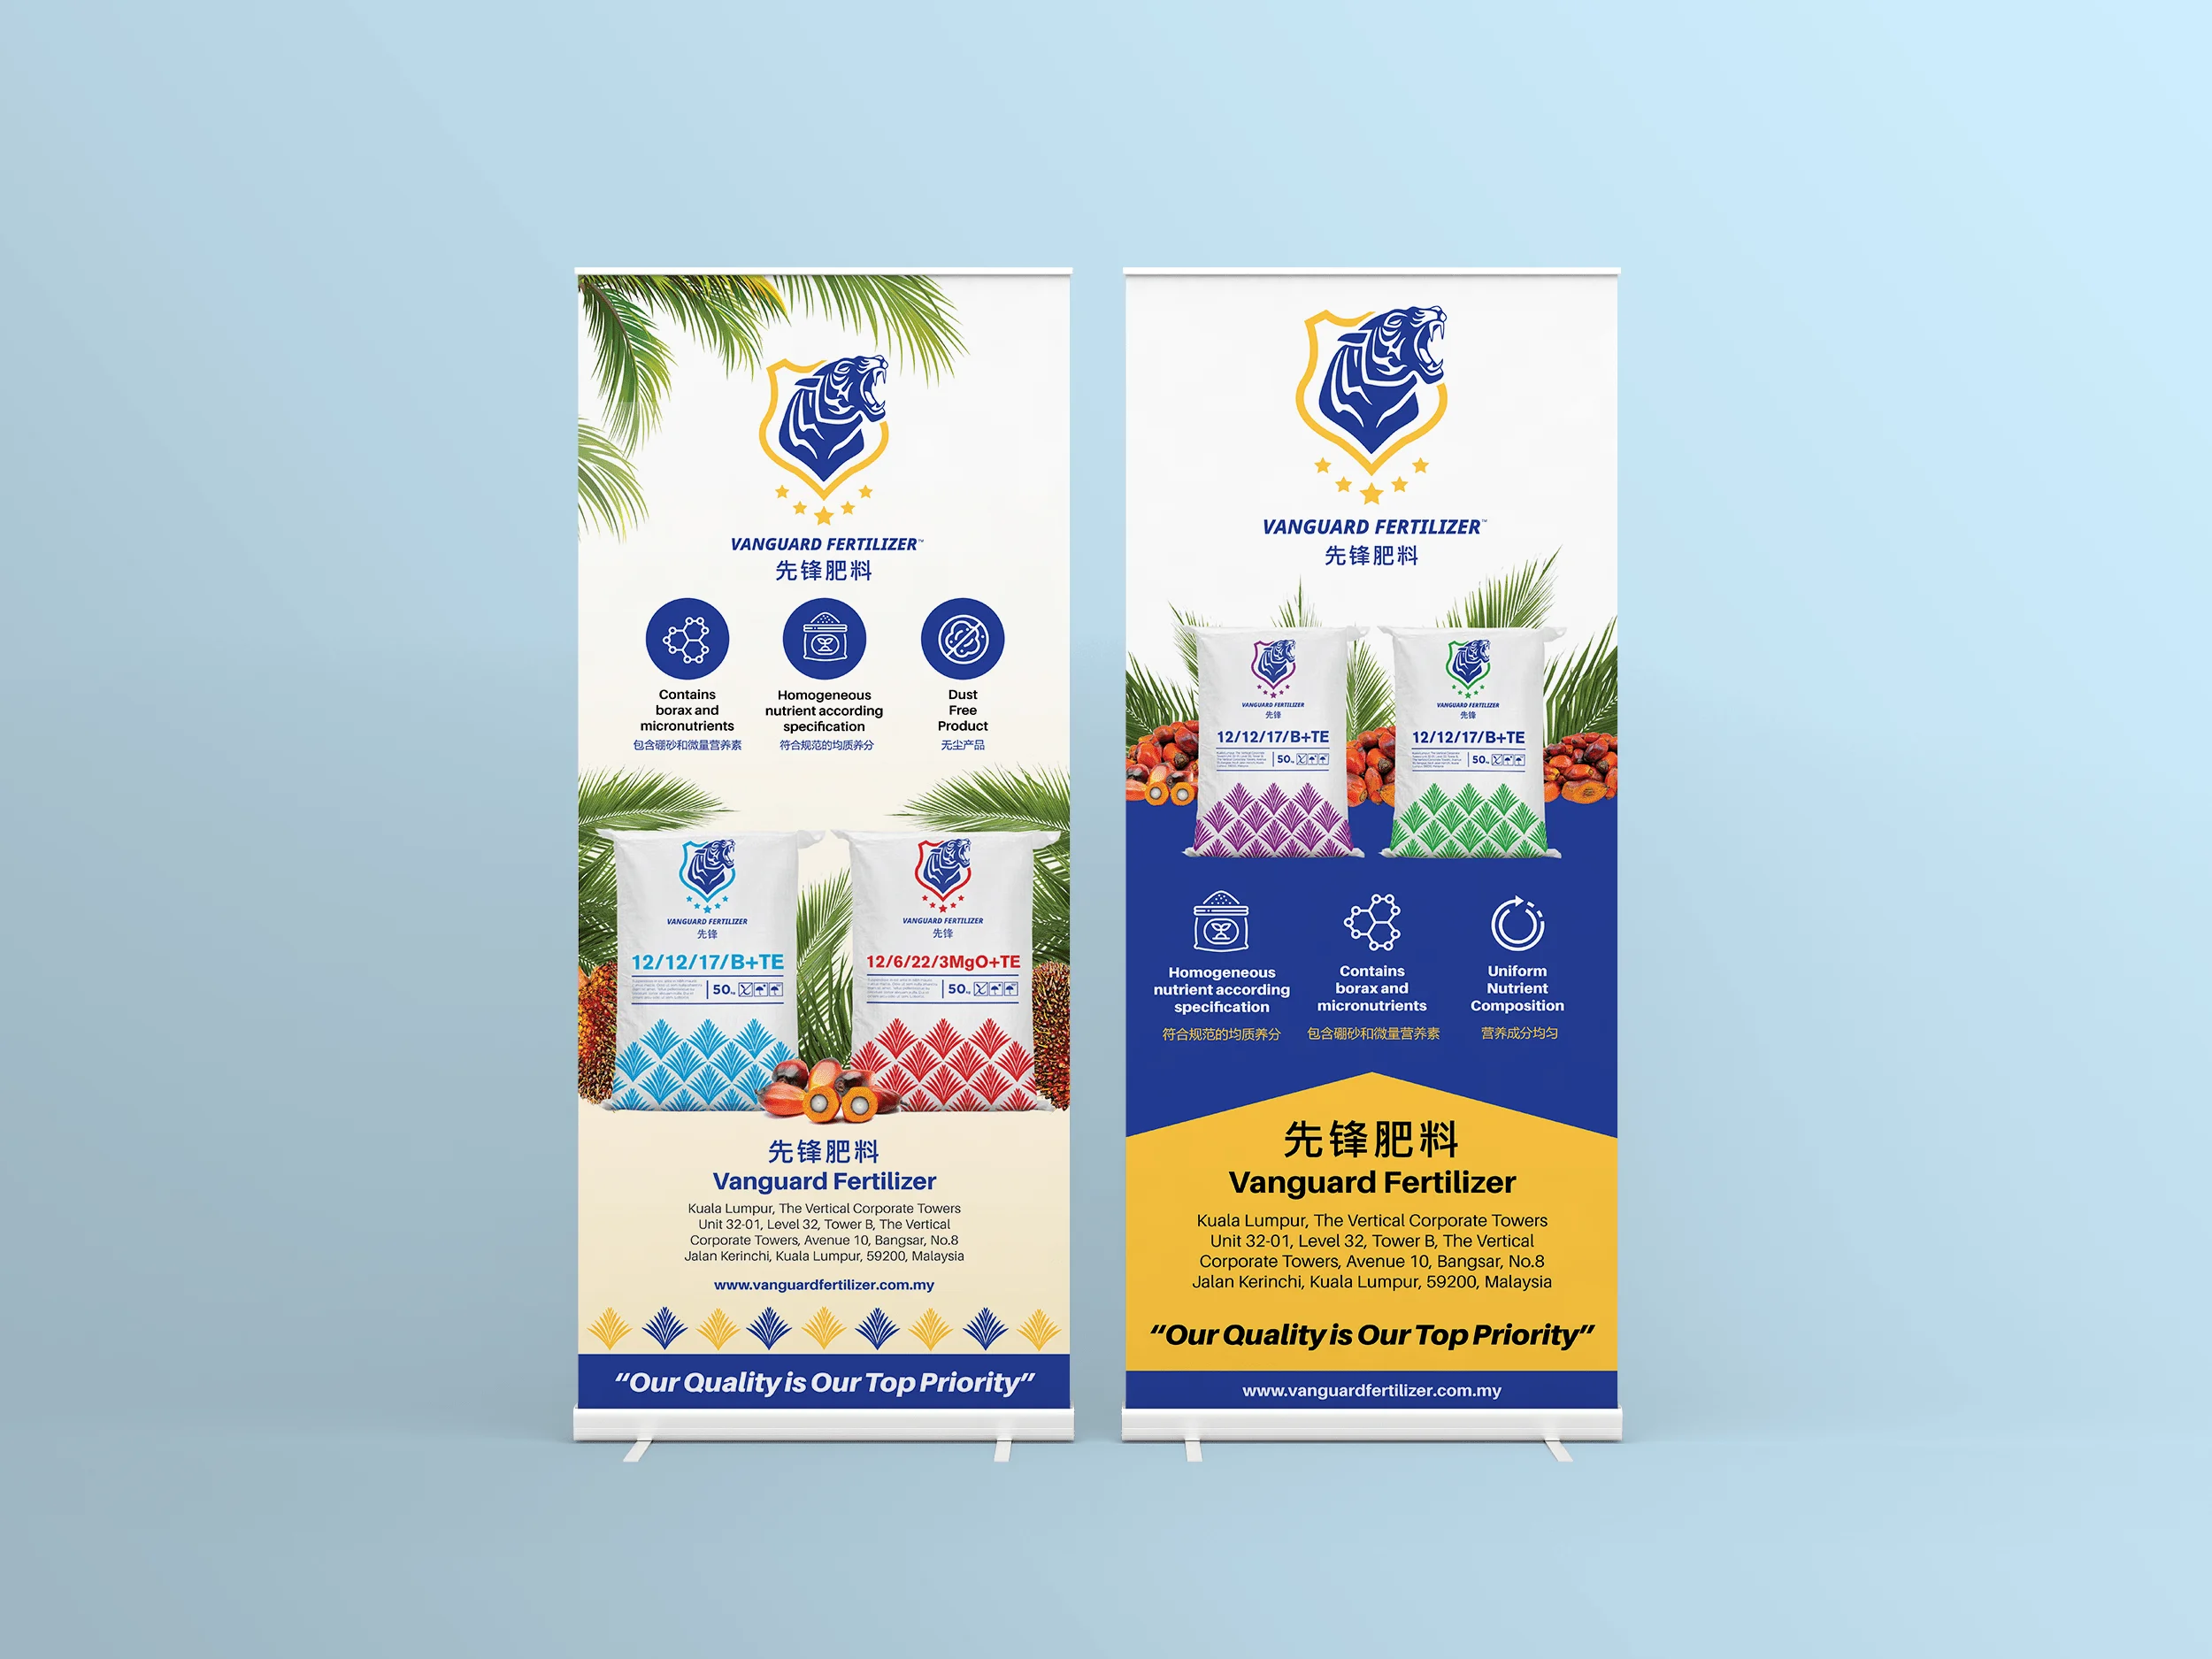 Marketing Collaterals | Graphic Design Agency Malaysia | 7